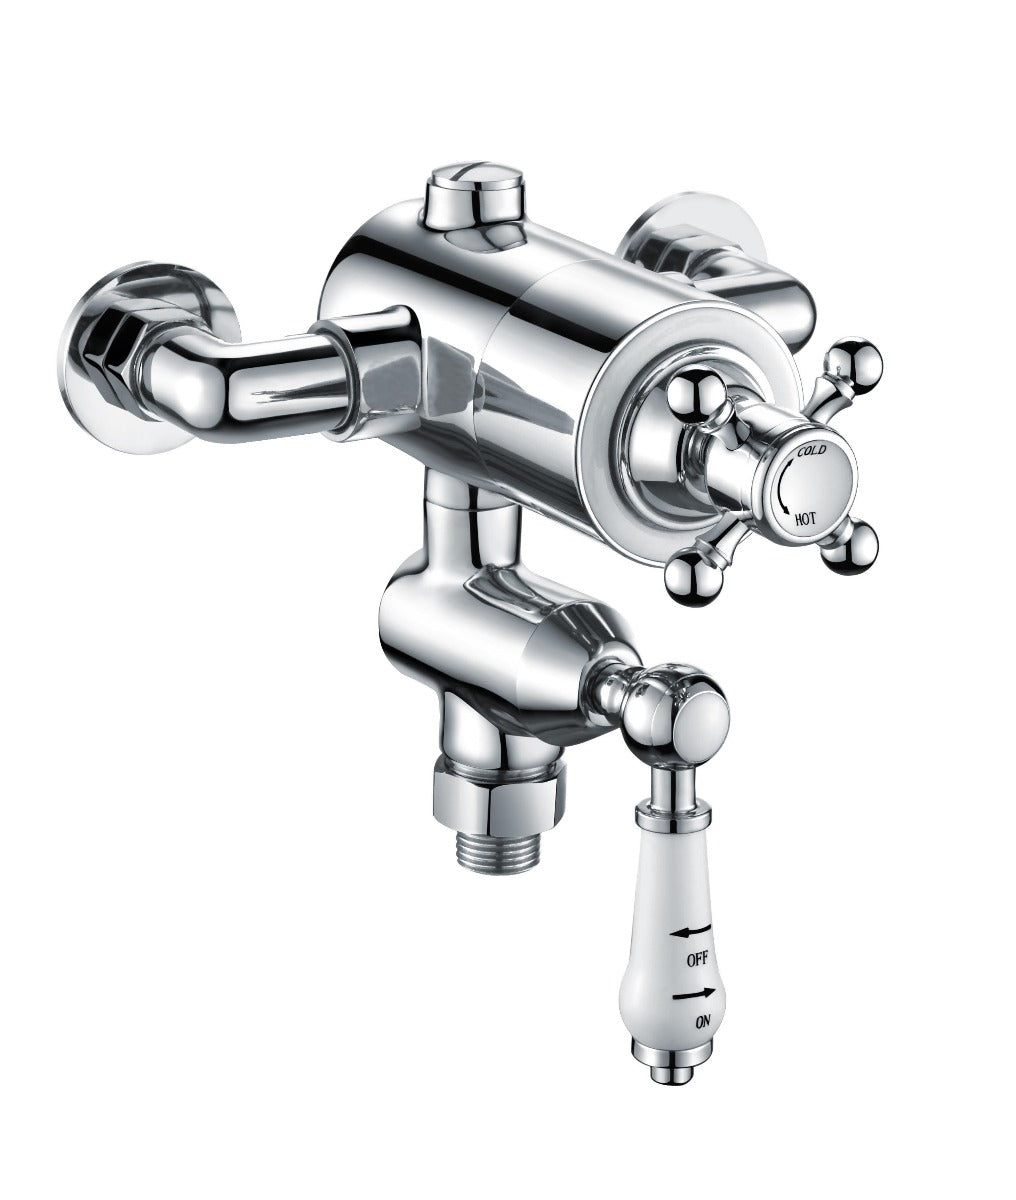 Scudo Traditional Exposed Valve